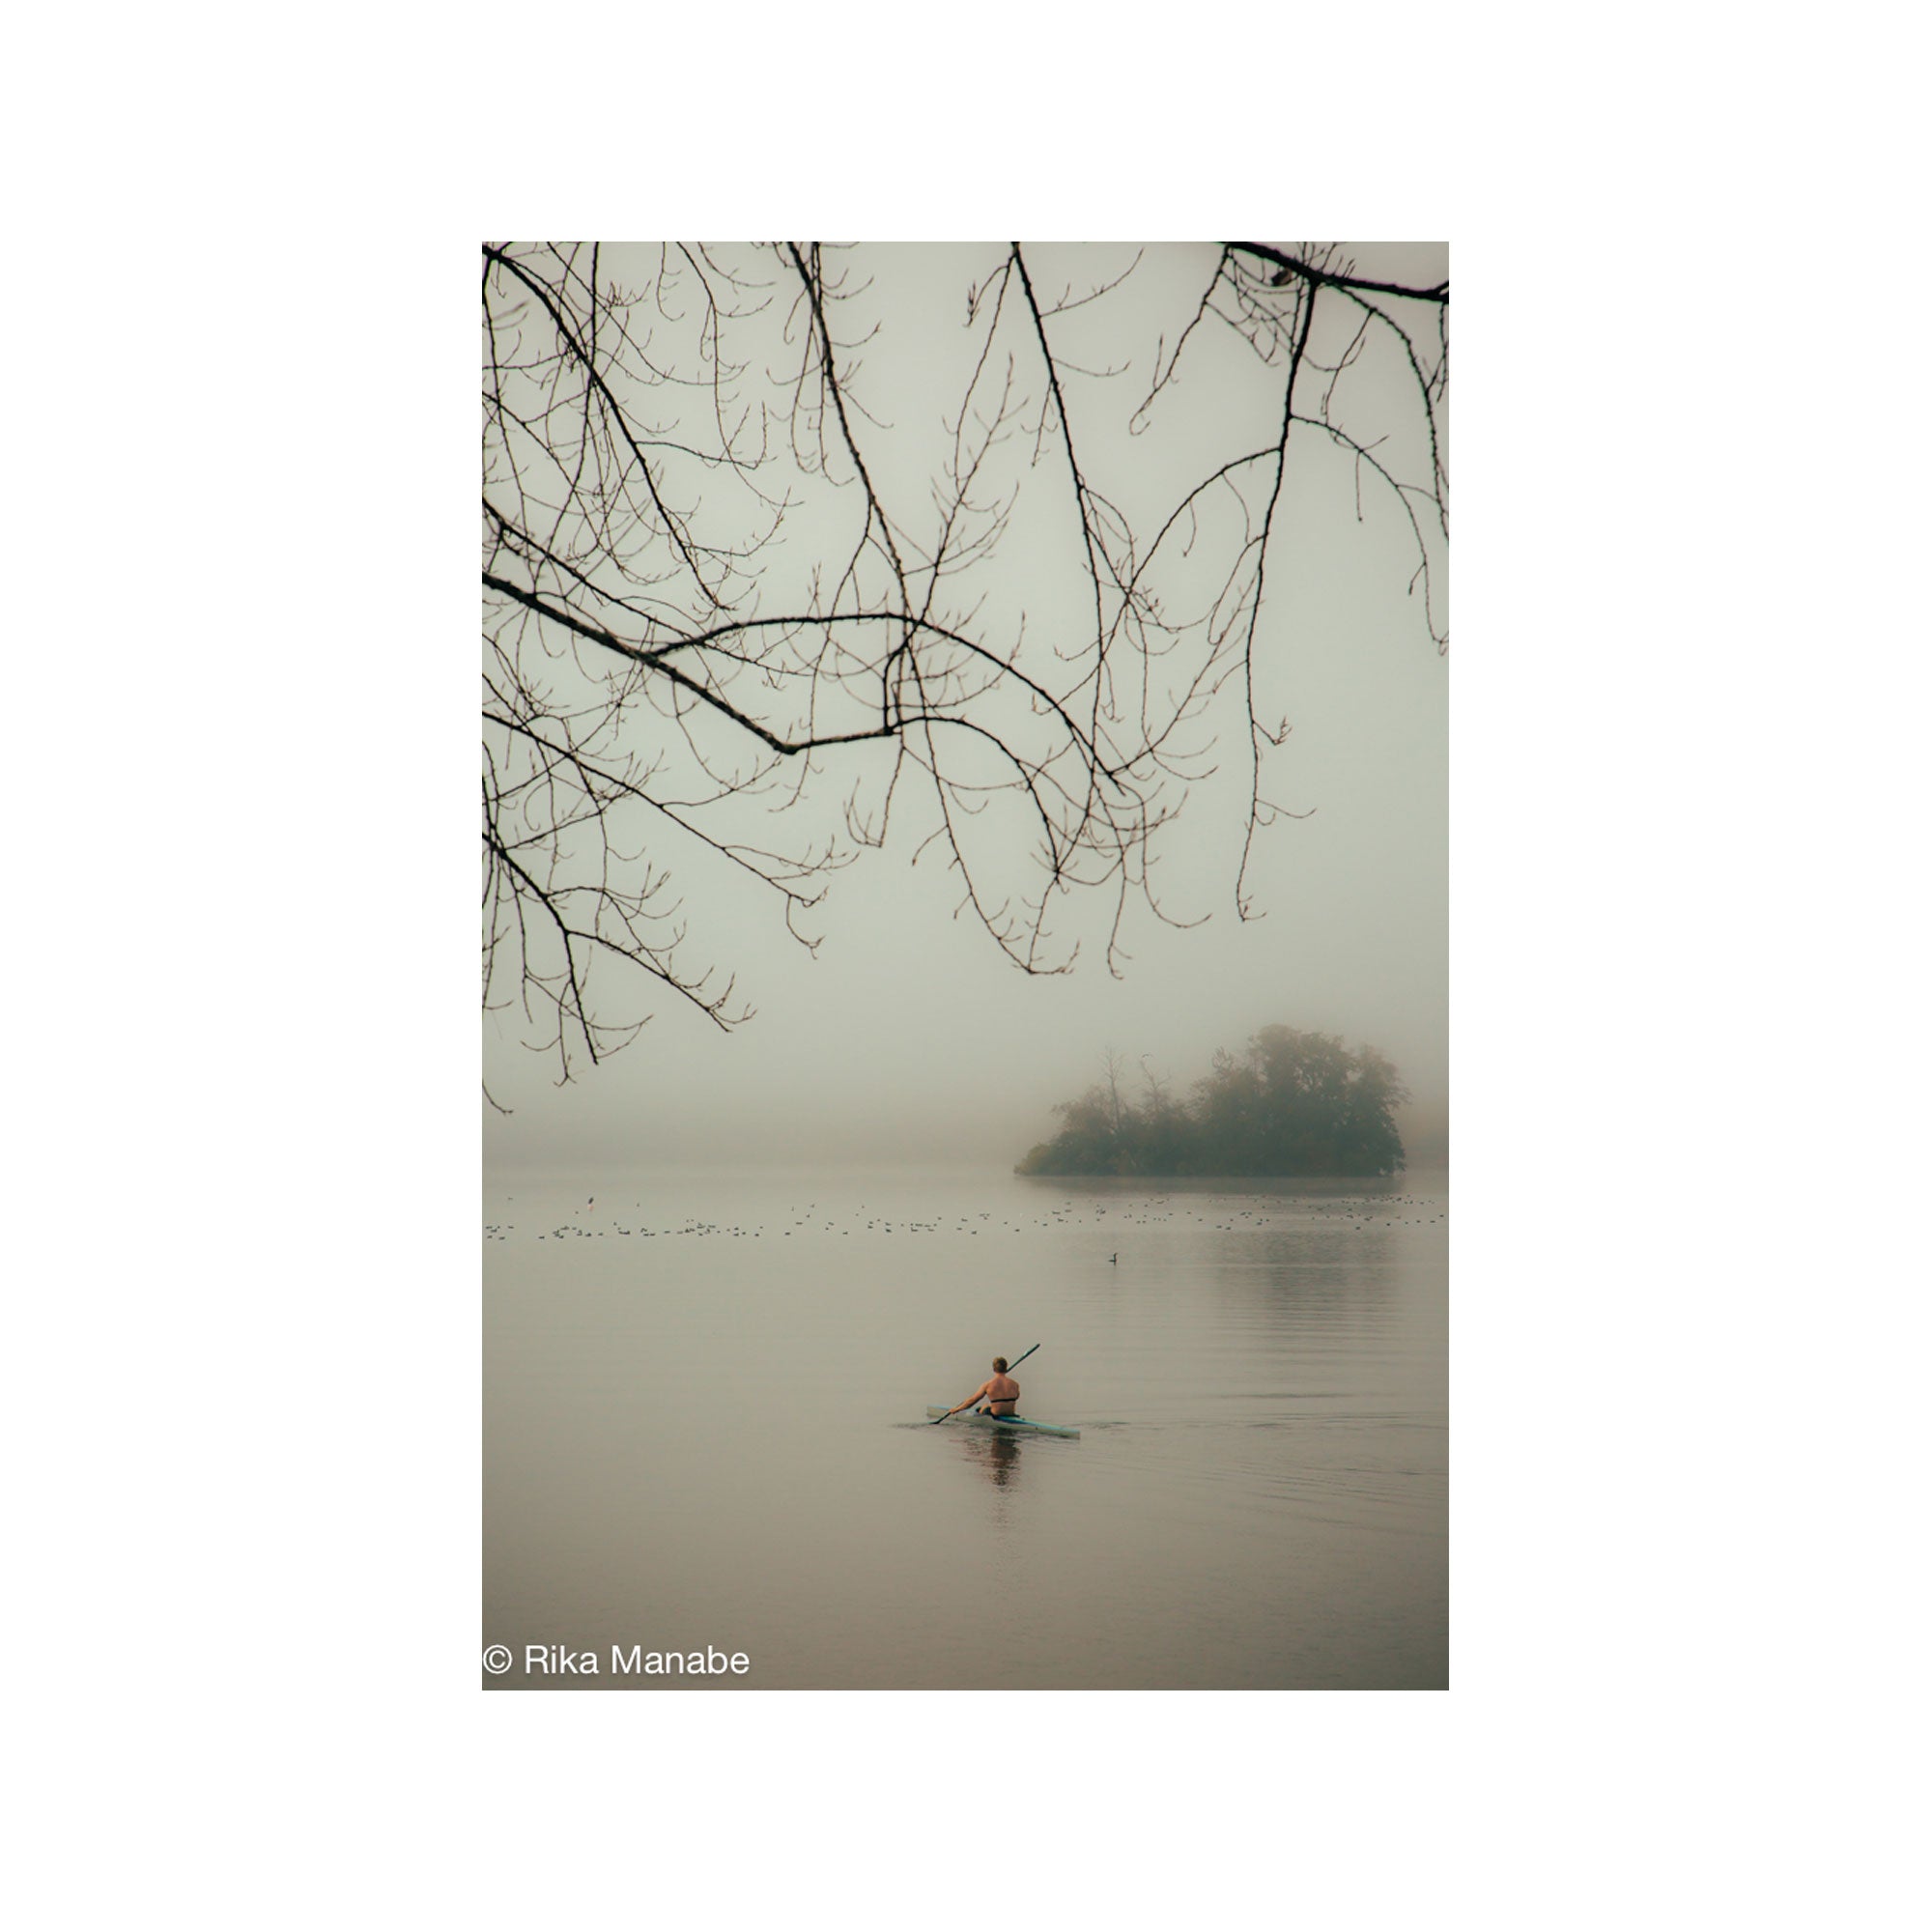 Kayaker In Mist by Rika Manabe